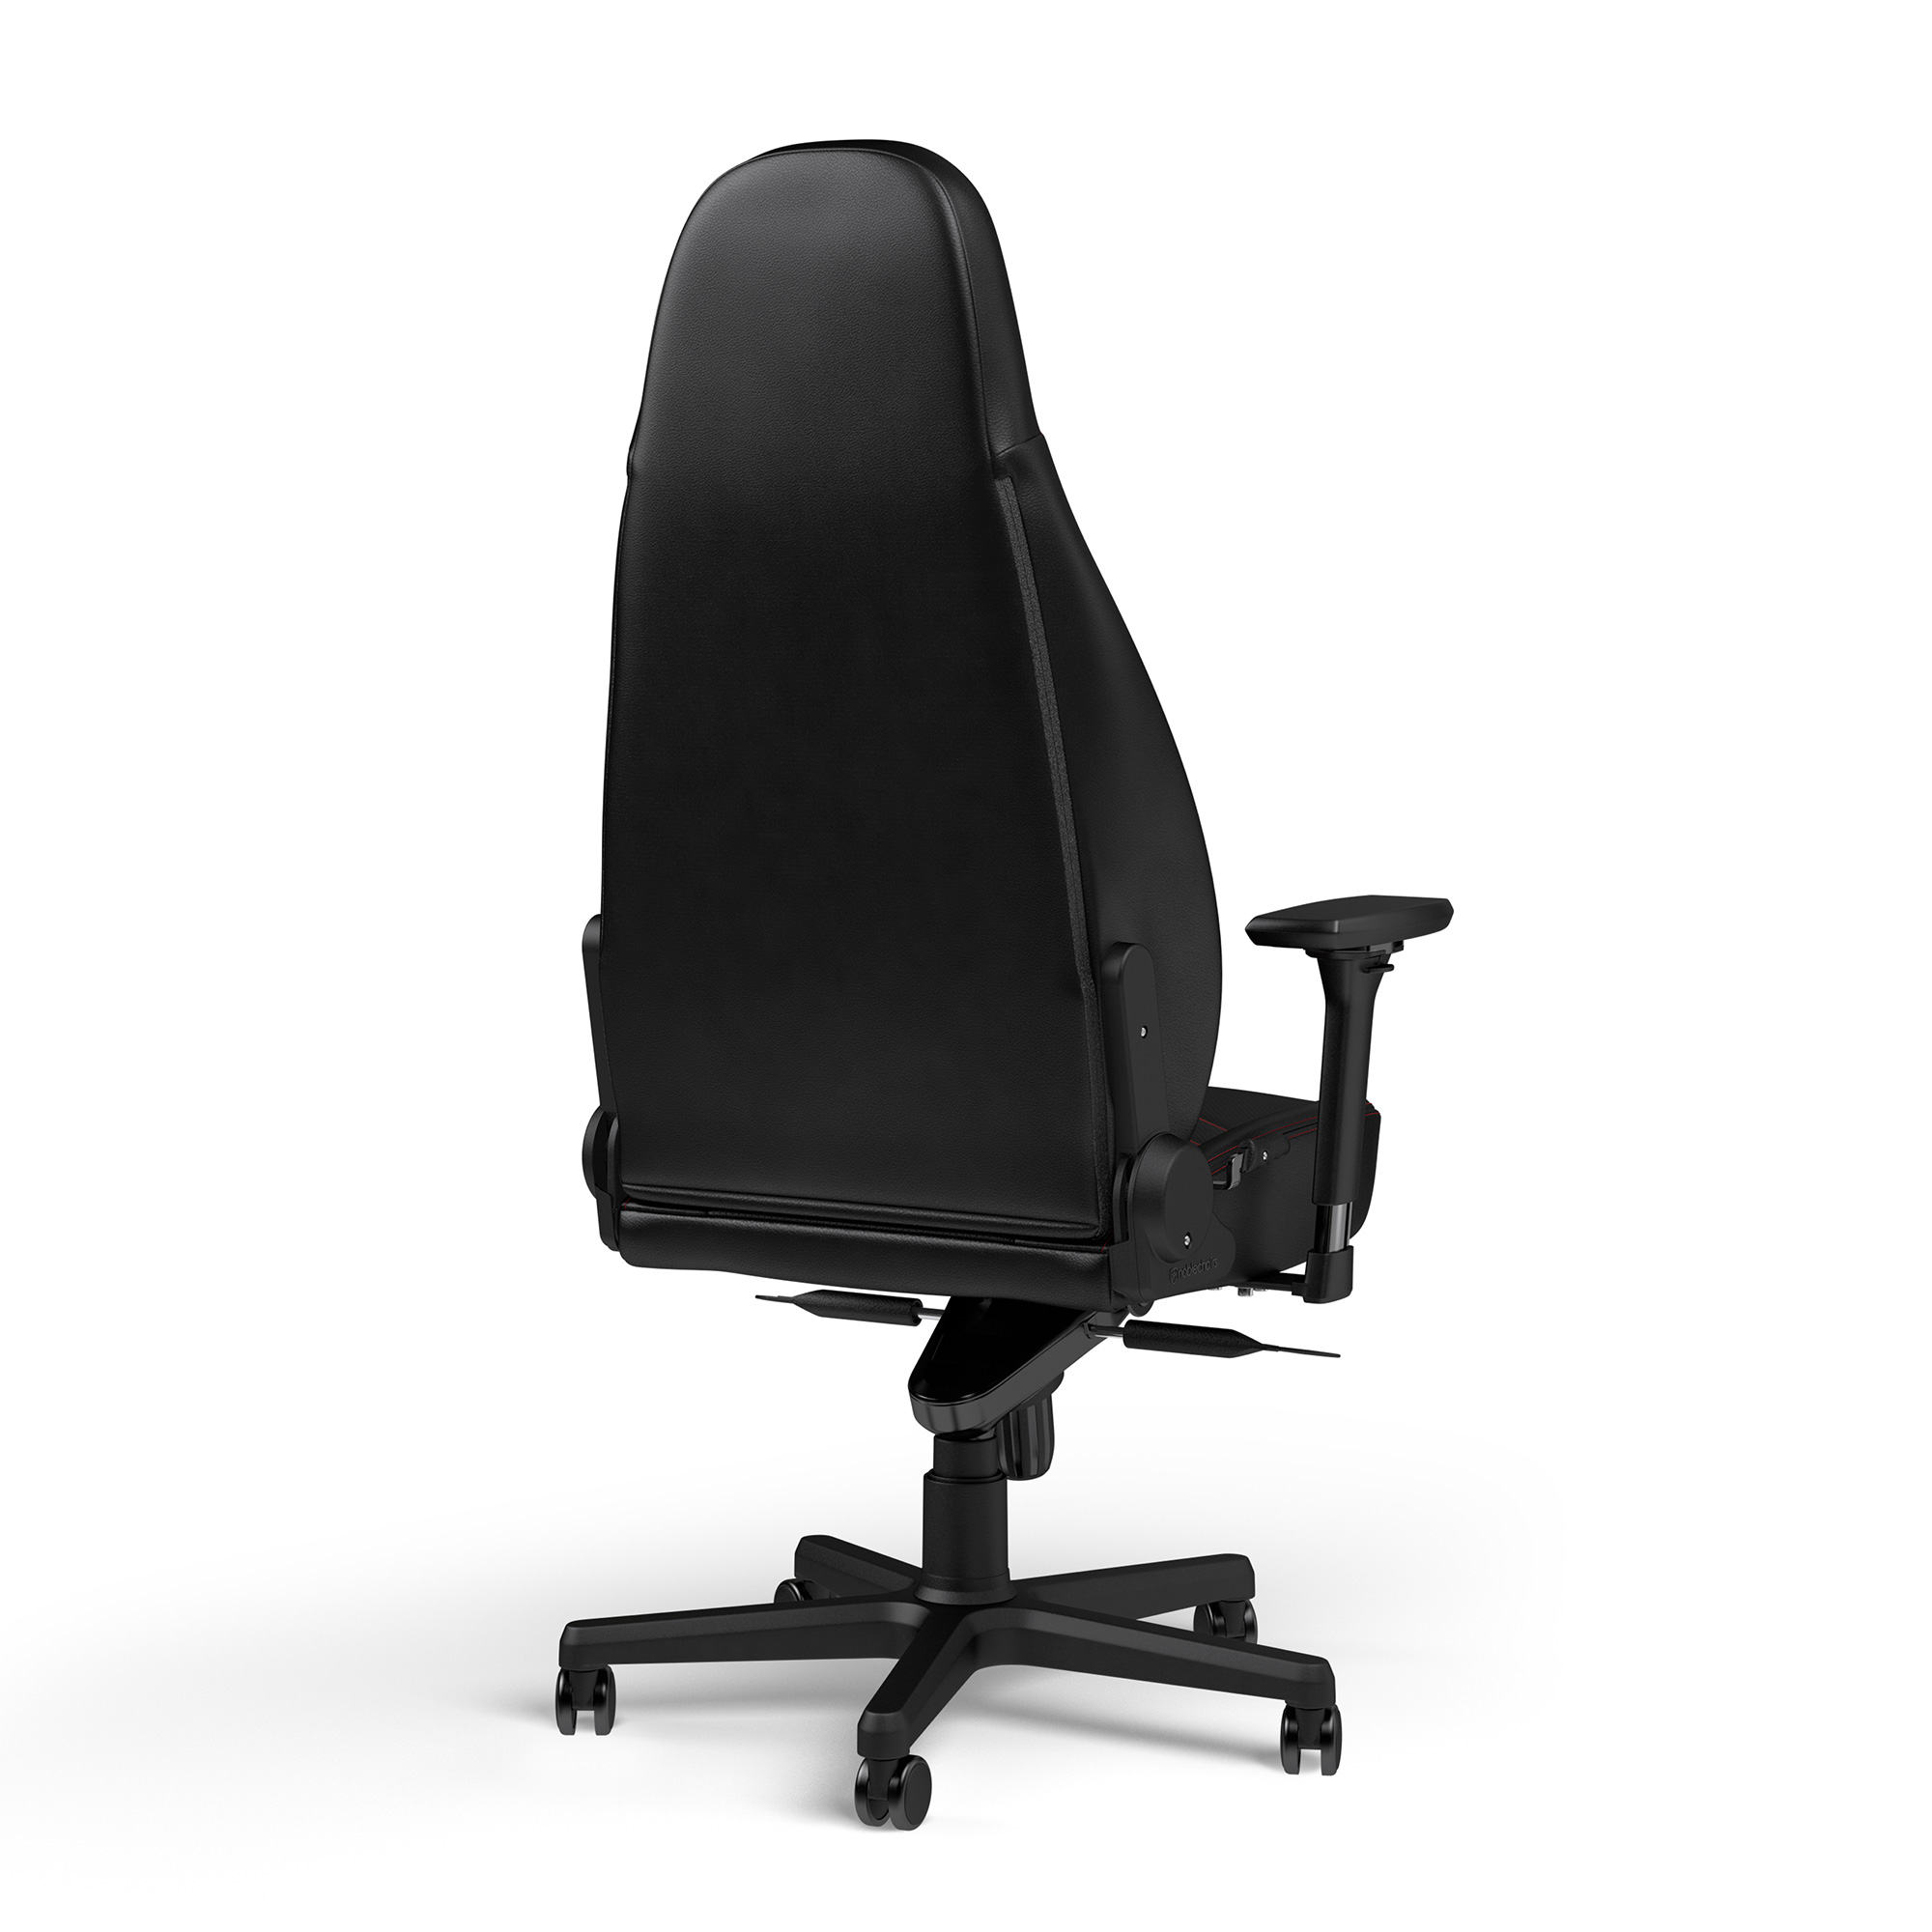 noblechairs - noblechairs ICON Gaming Chair - Black/Red